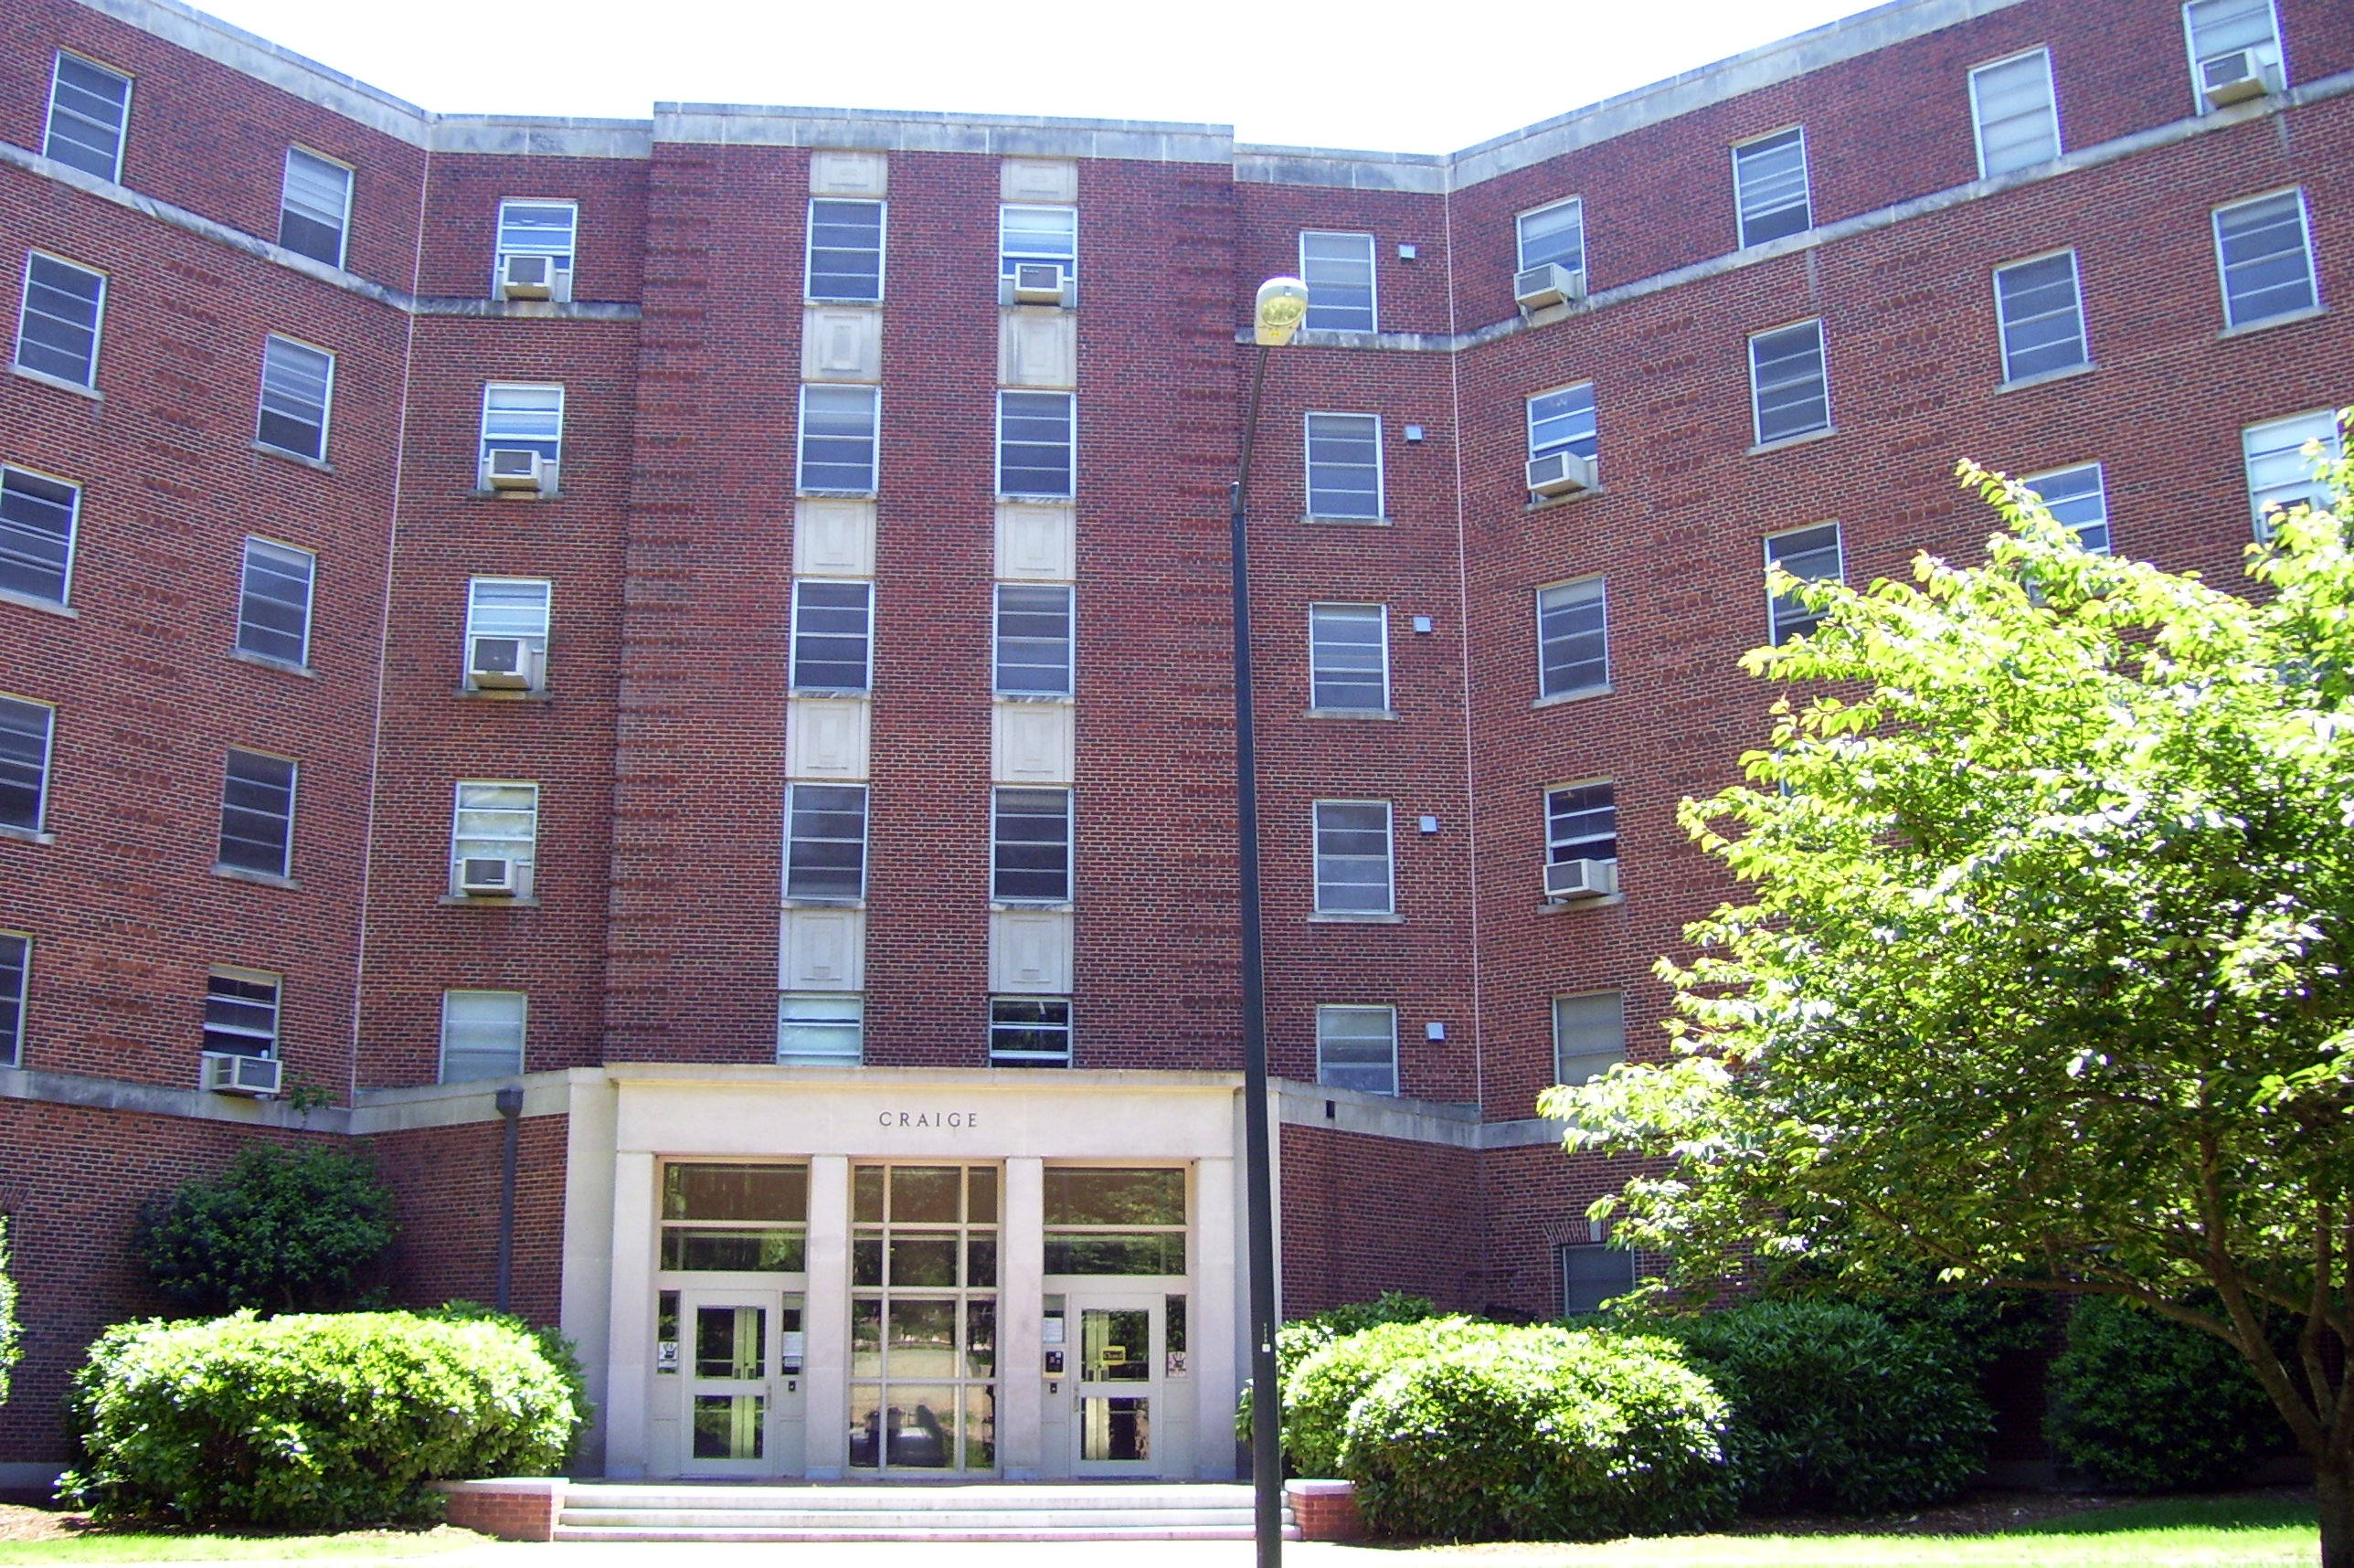 Contemporary Photo of Craige Residence Hall